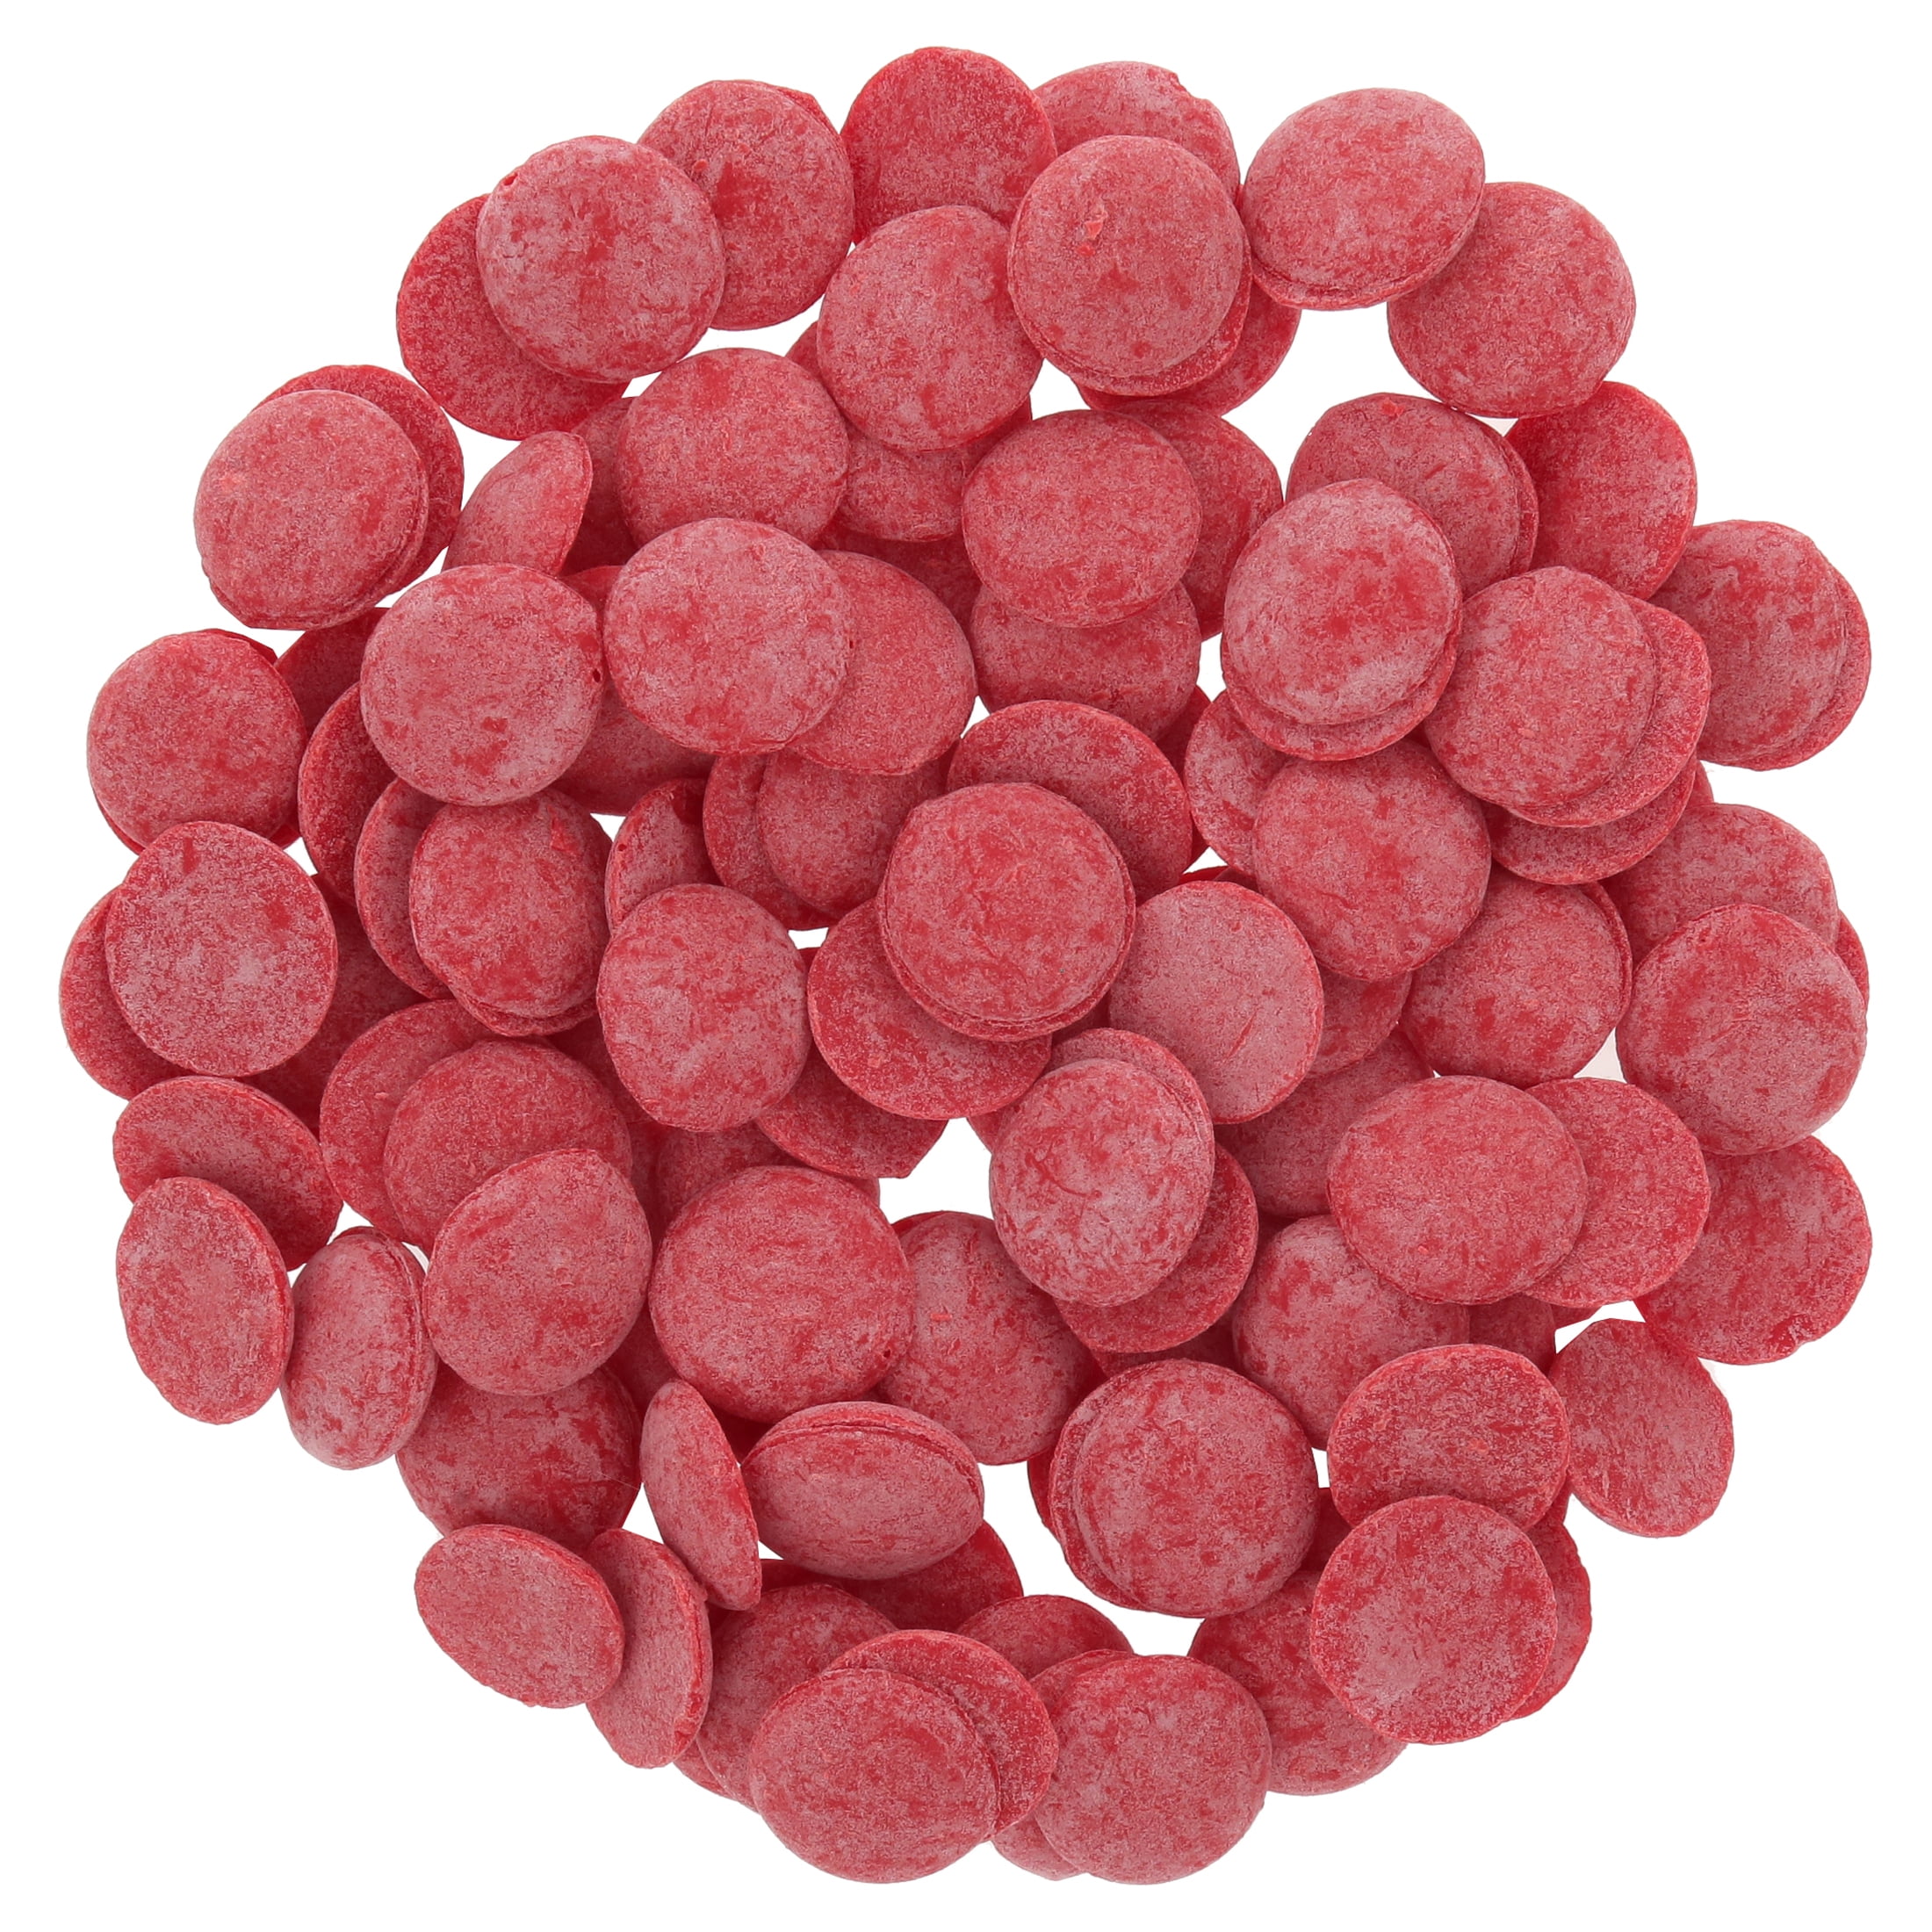 Wilton Red Candy Melts® Candy, 12 oz.